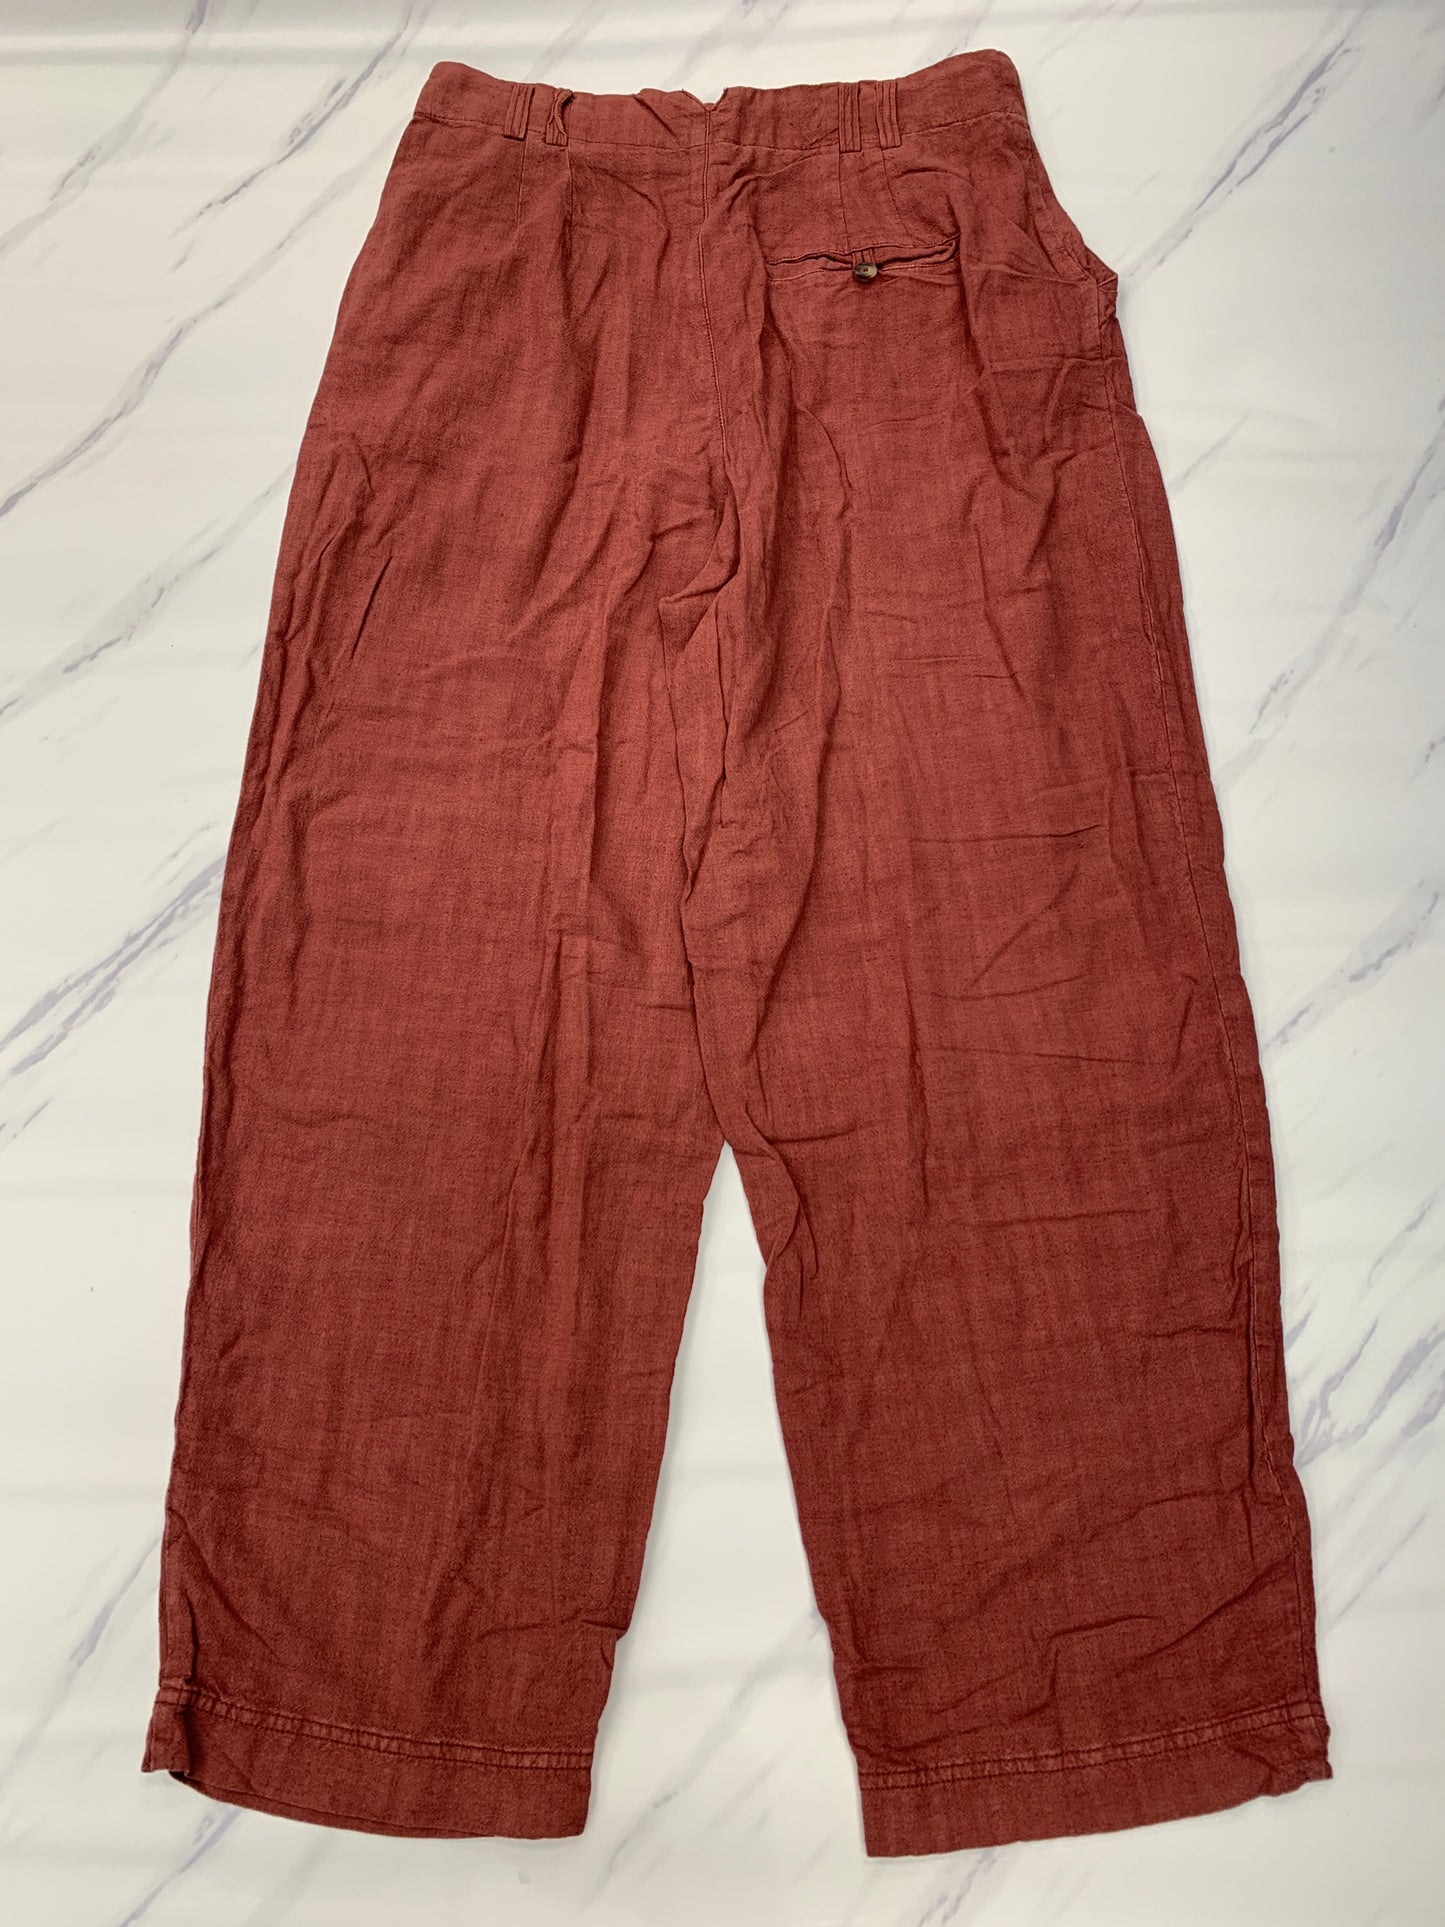 Red Pants Chinos & Khakis Free People, Size 6